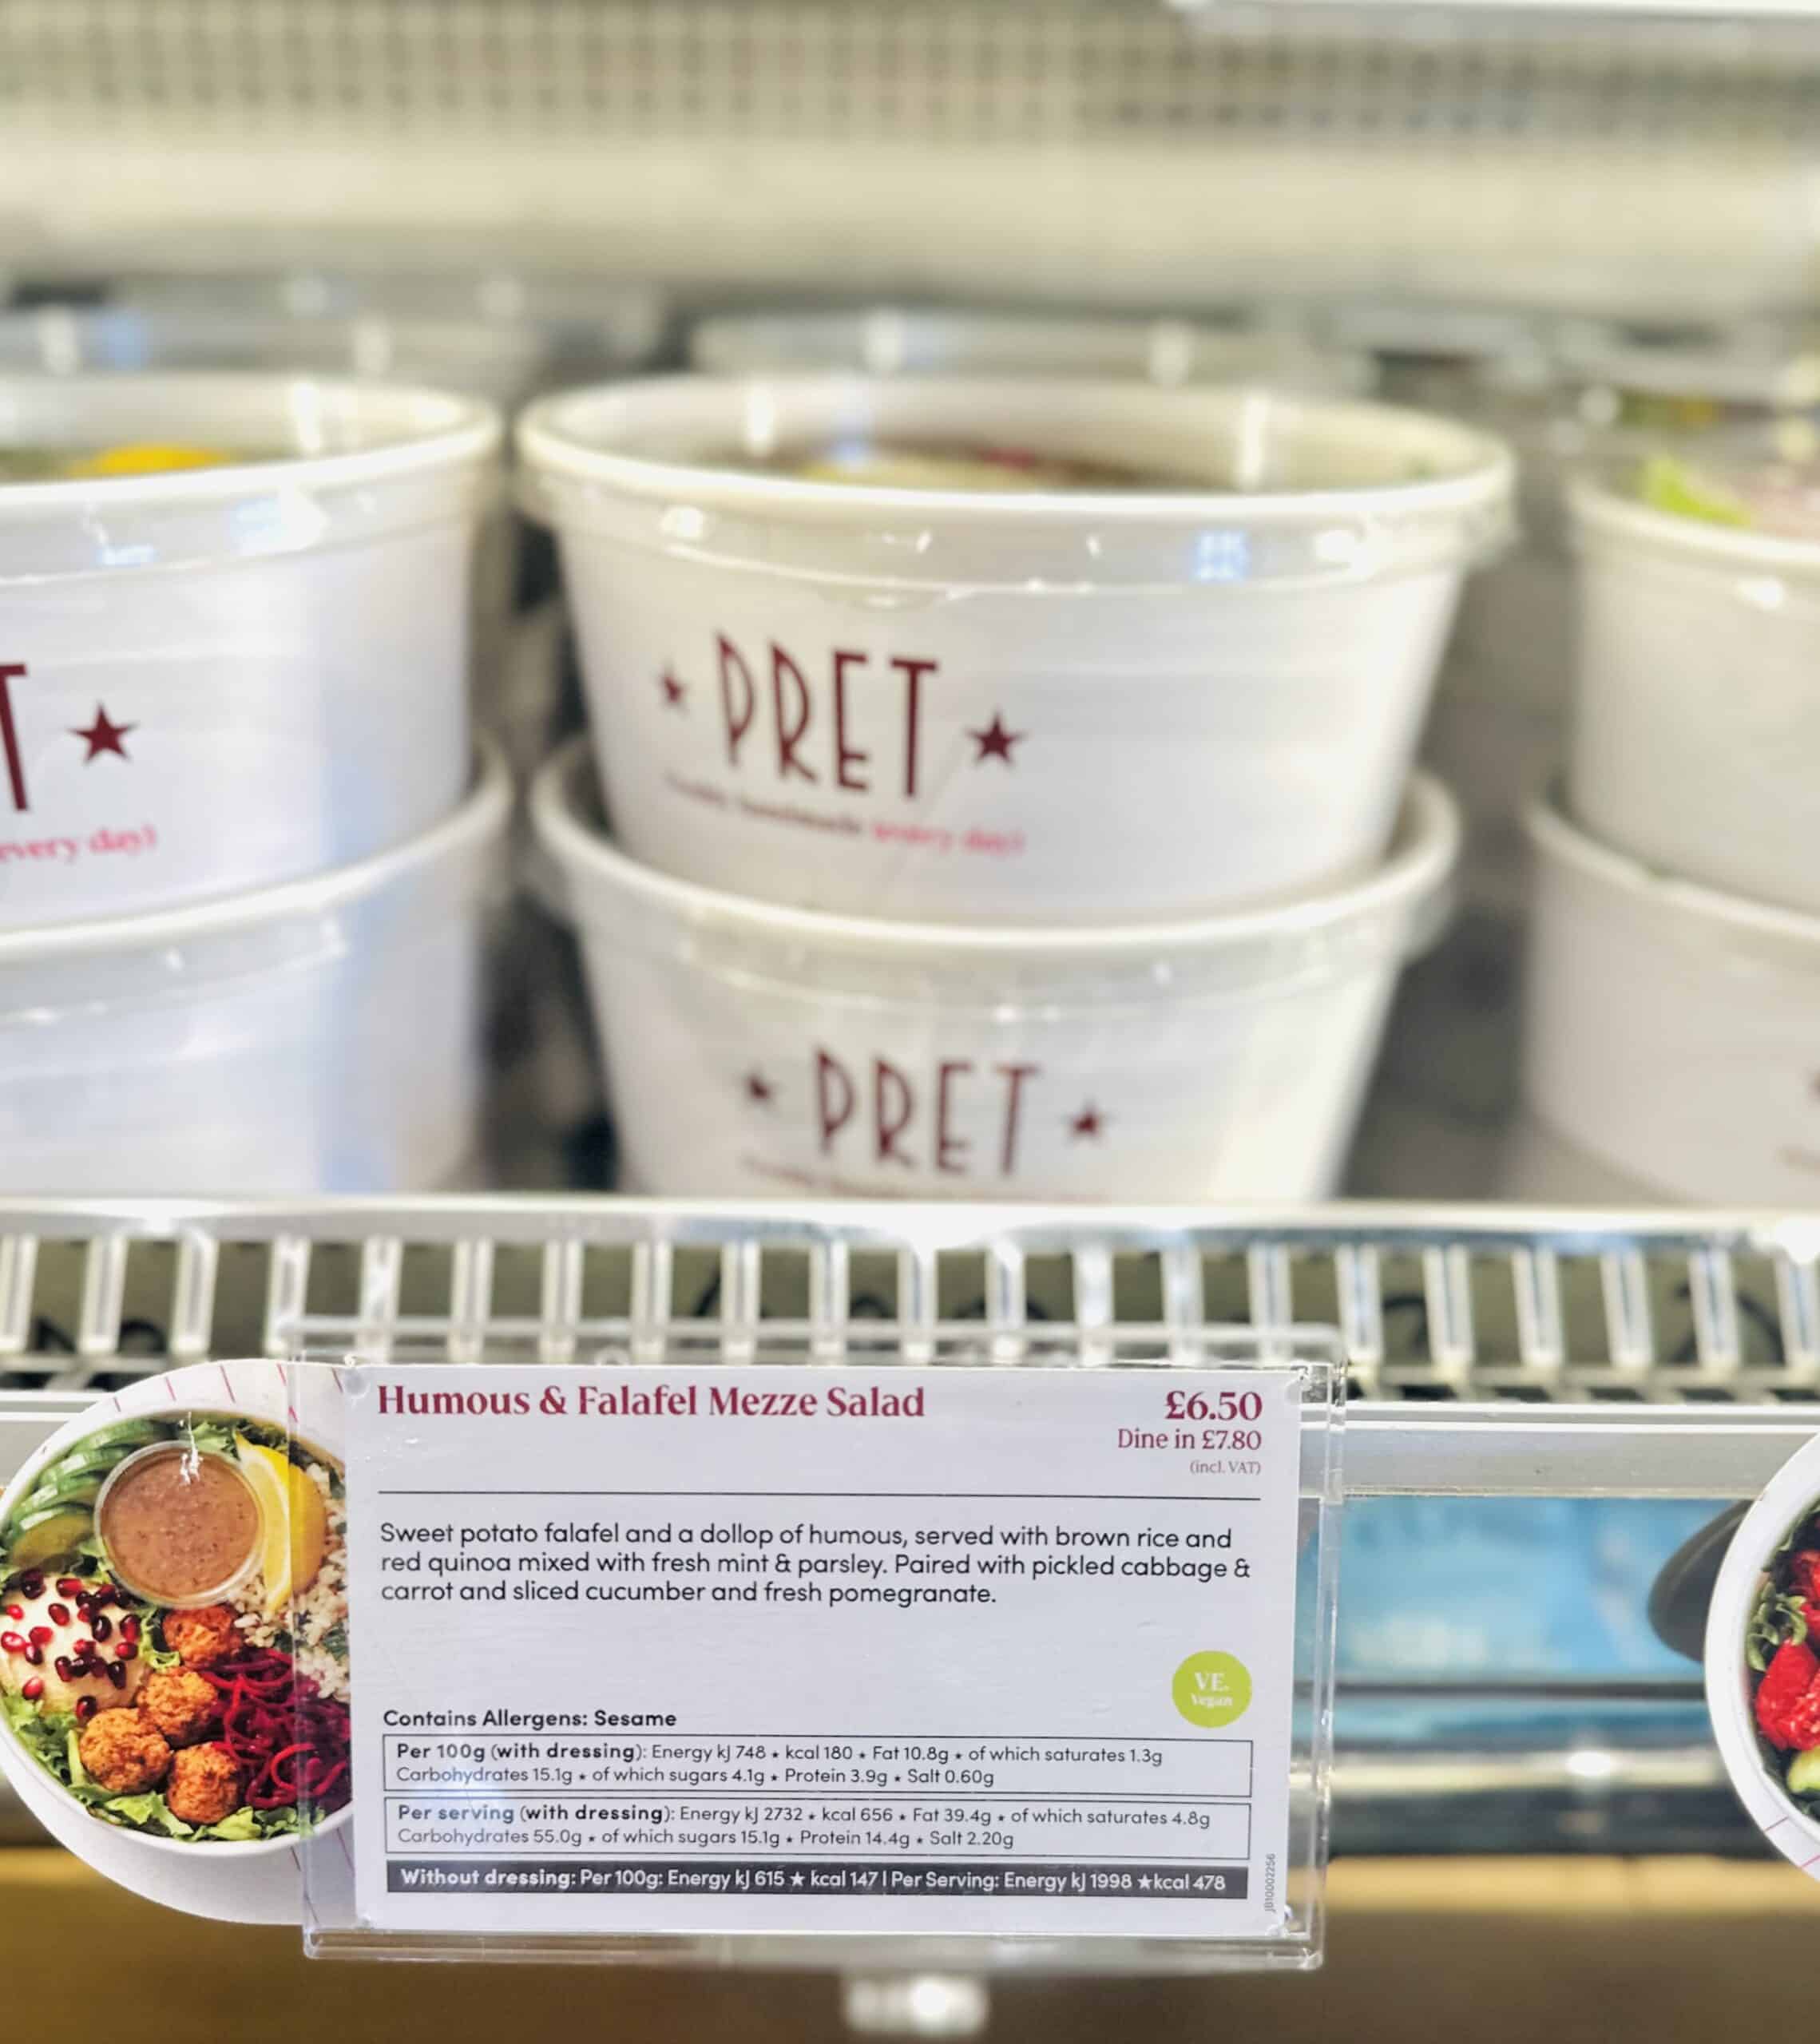 A salad bowl from pret.